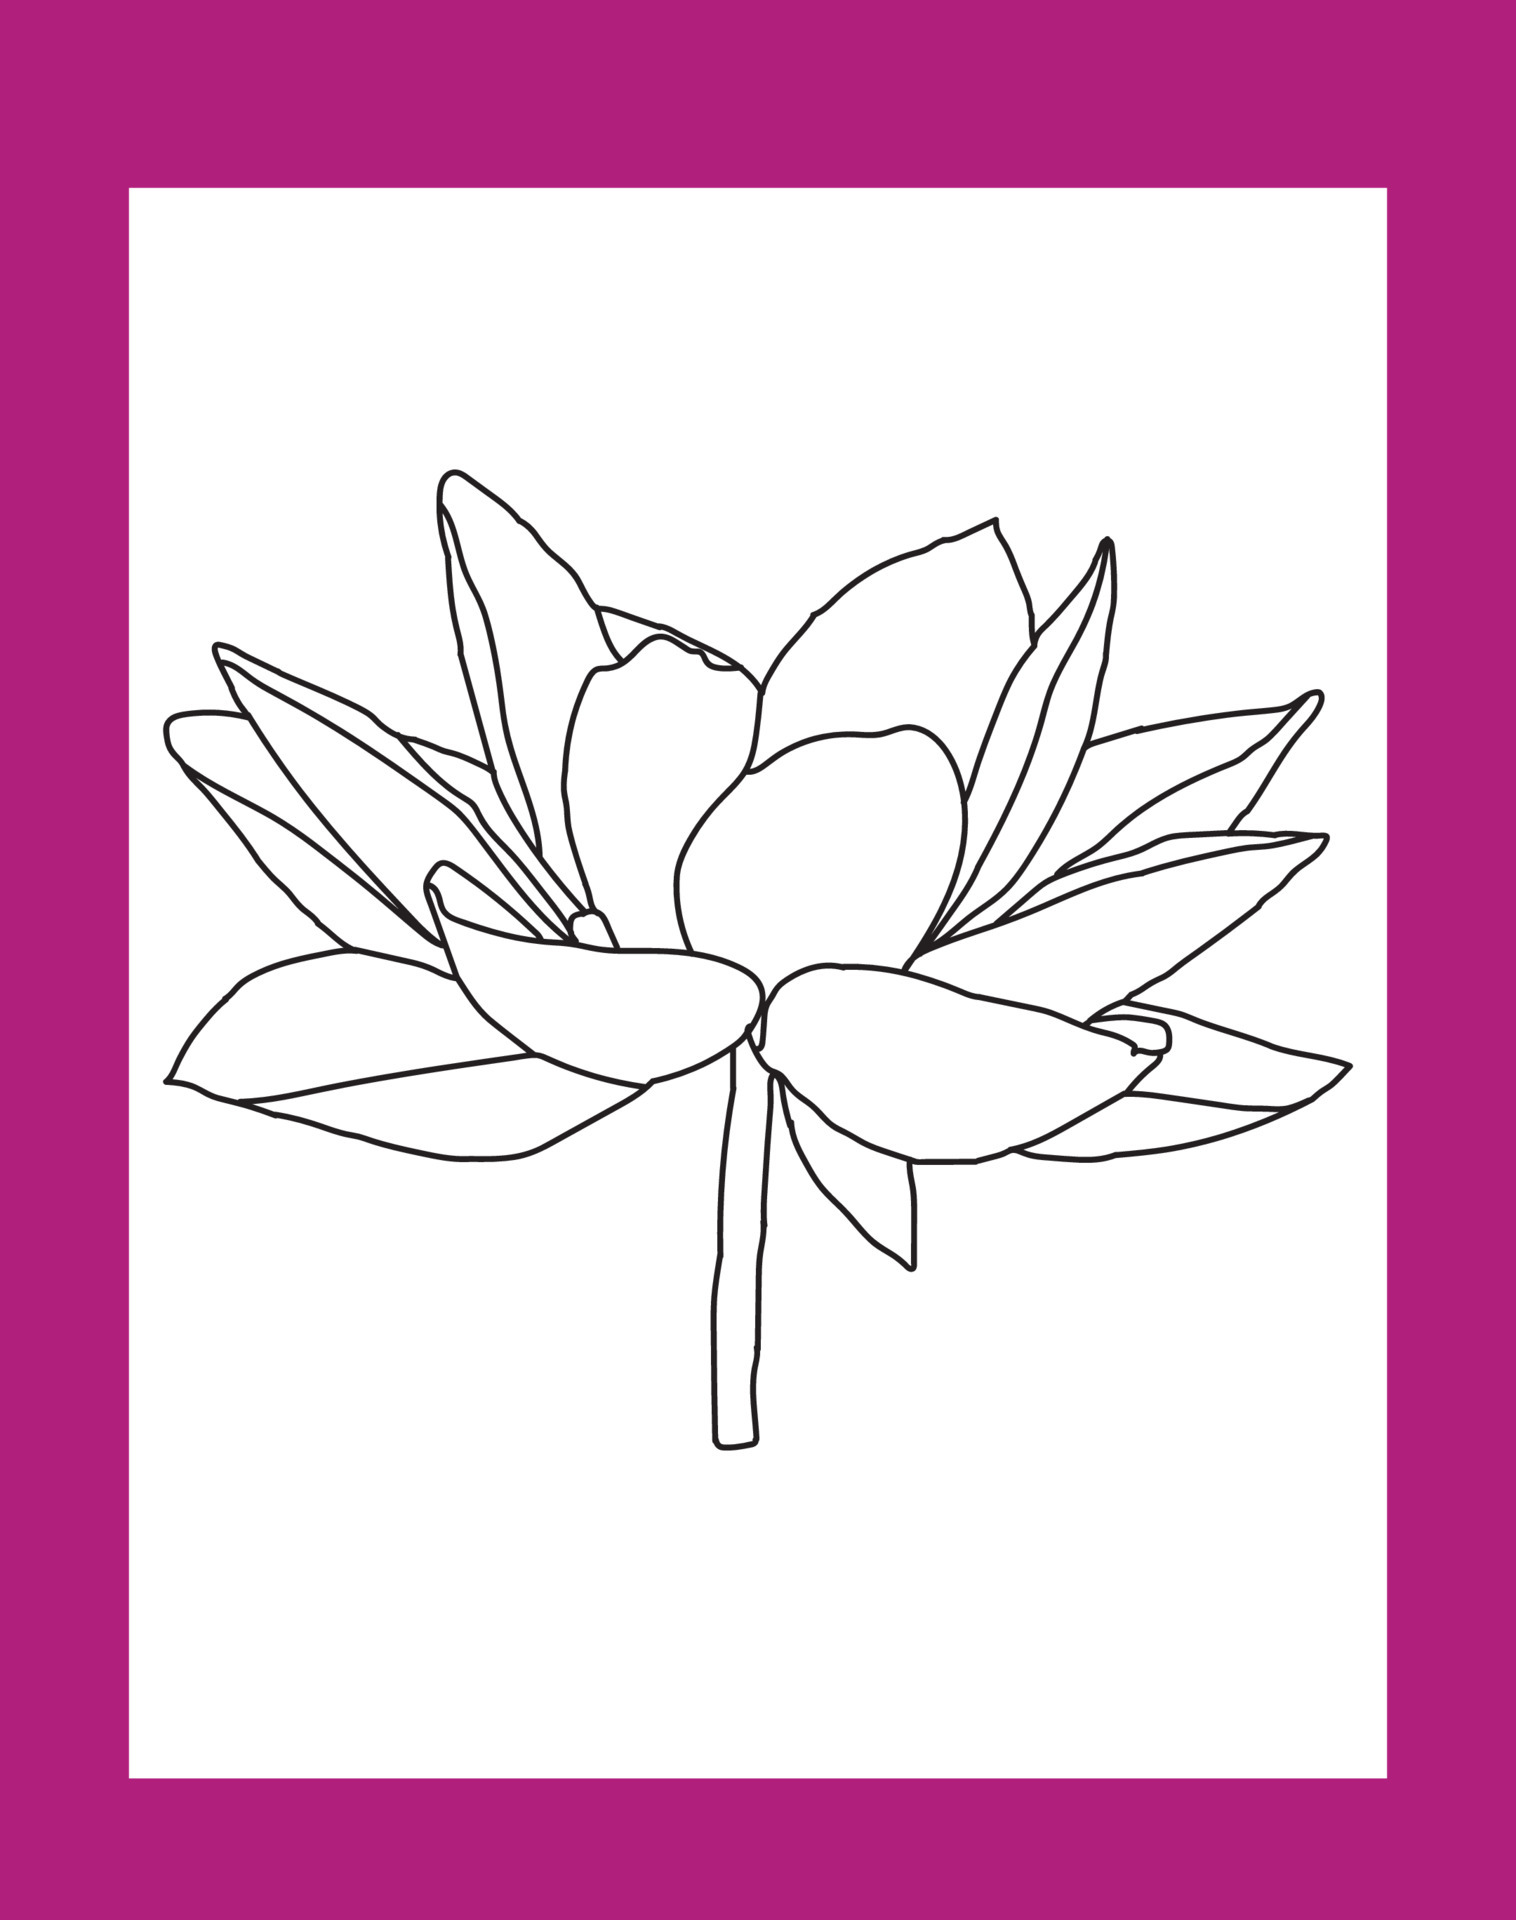 How To Draw Lotus Flower | Simple Step-By-Step Guide With Images